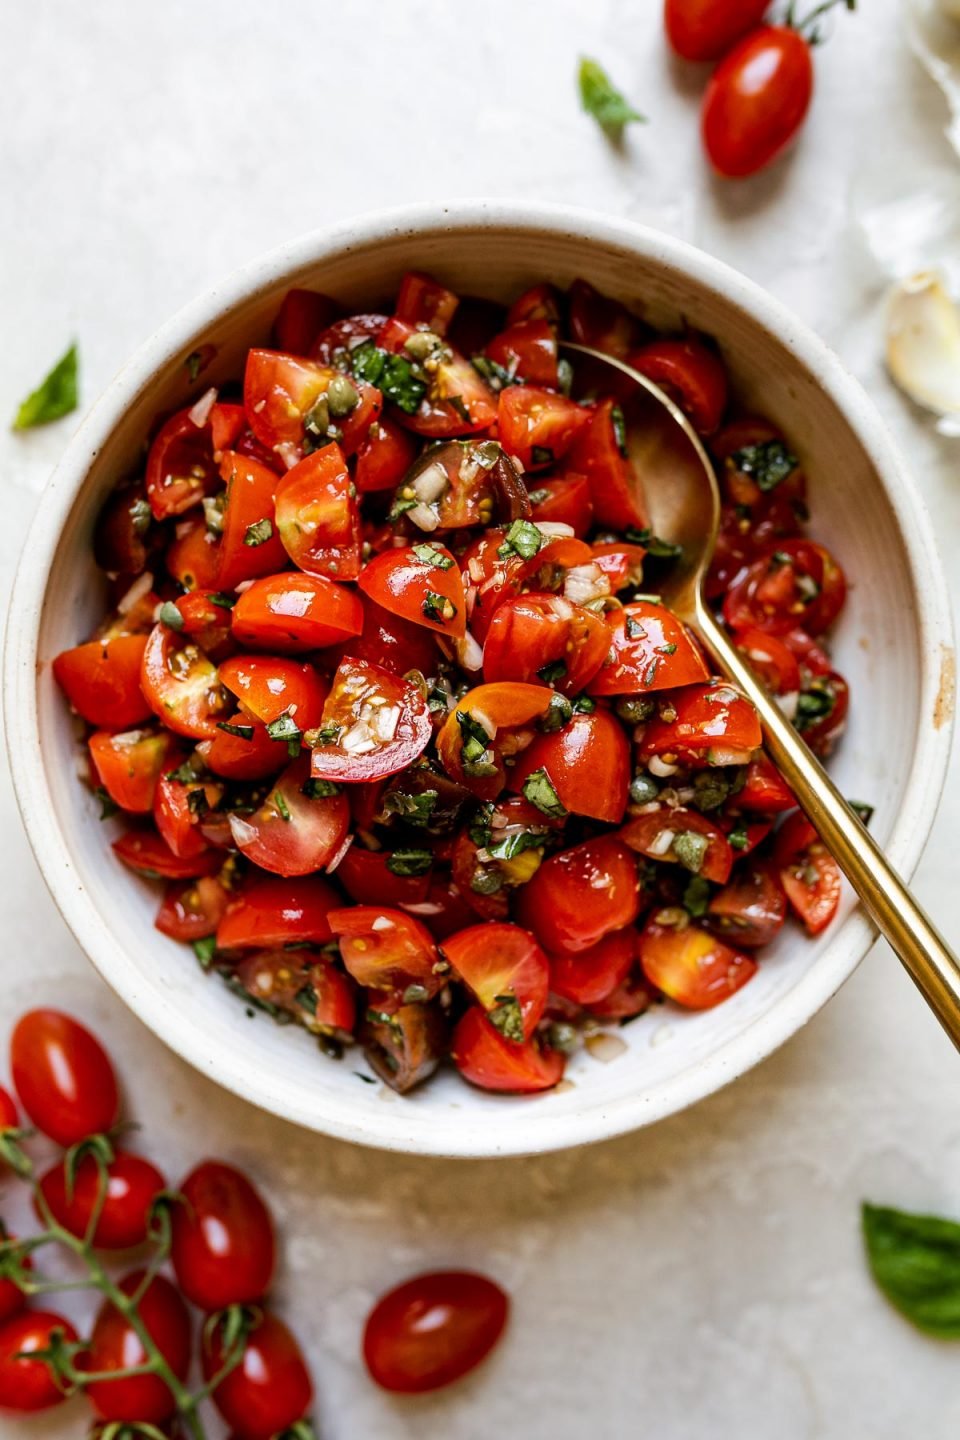 Top down view of fresh bruschetta in a small light colored ceramic bowl atop of a textured white surface. A gold spoon is nestled in the bowl, and the bowl is surrounded by fresh loose basil, cherry tomatoes on the vine, a few loose cherry tomatoes, & a clove of garlic.